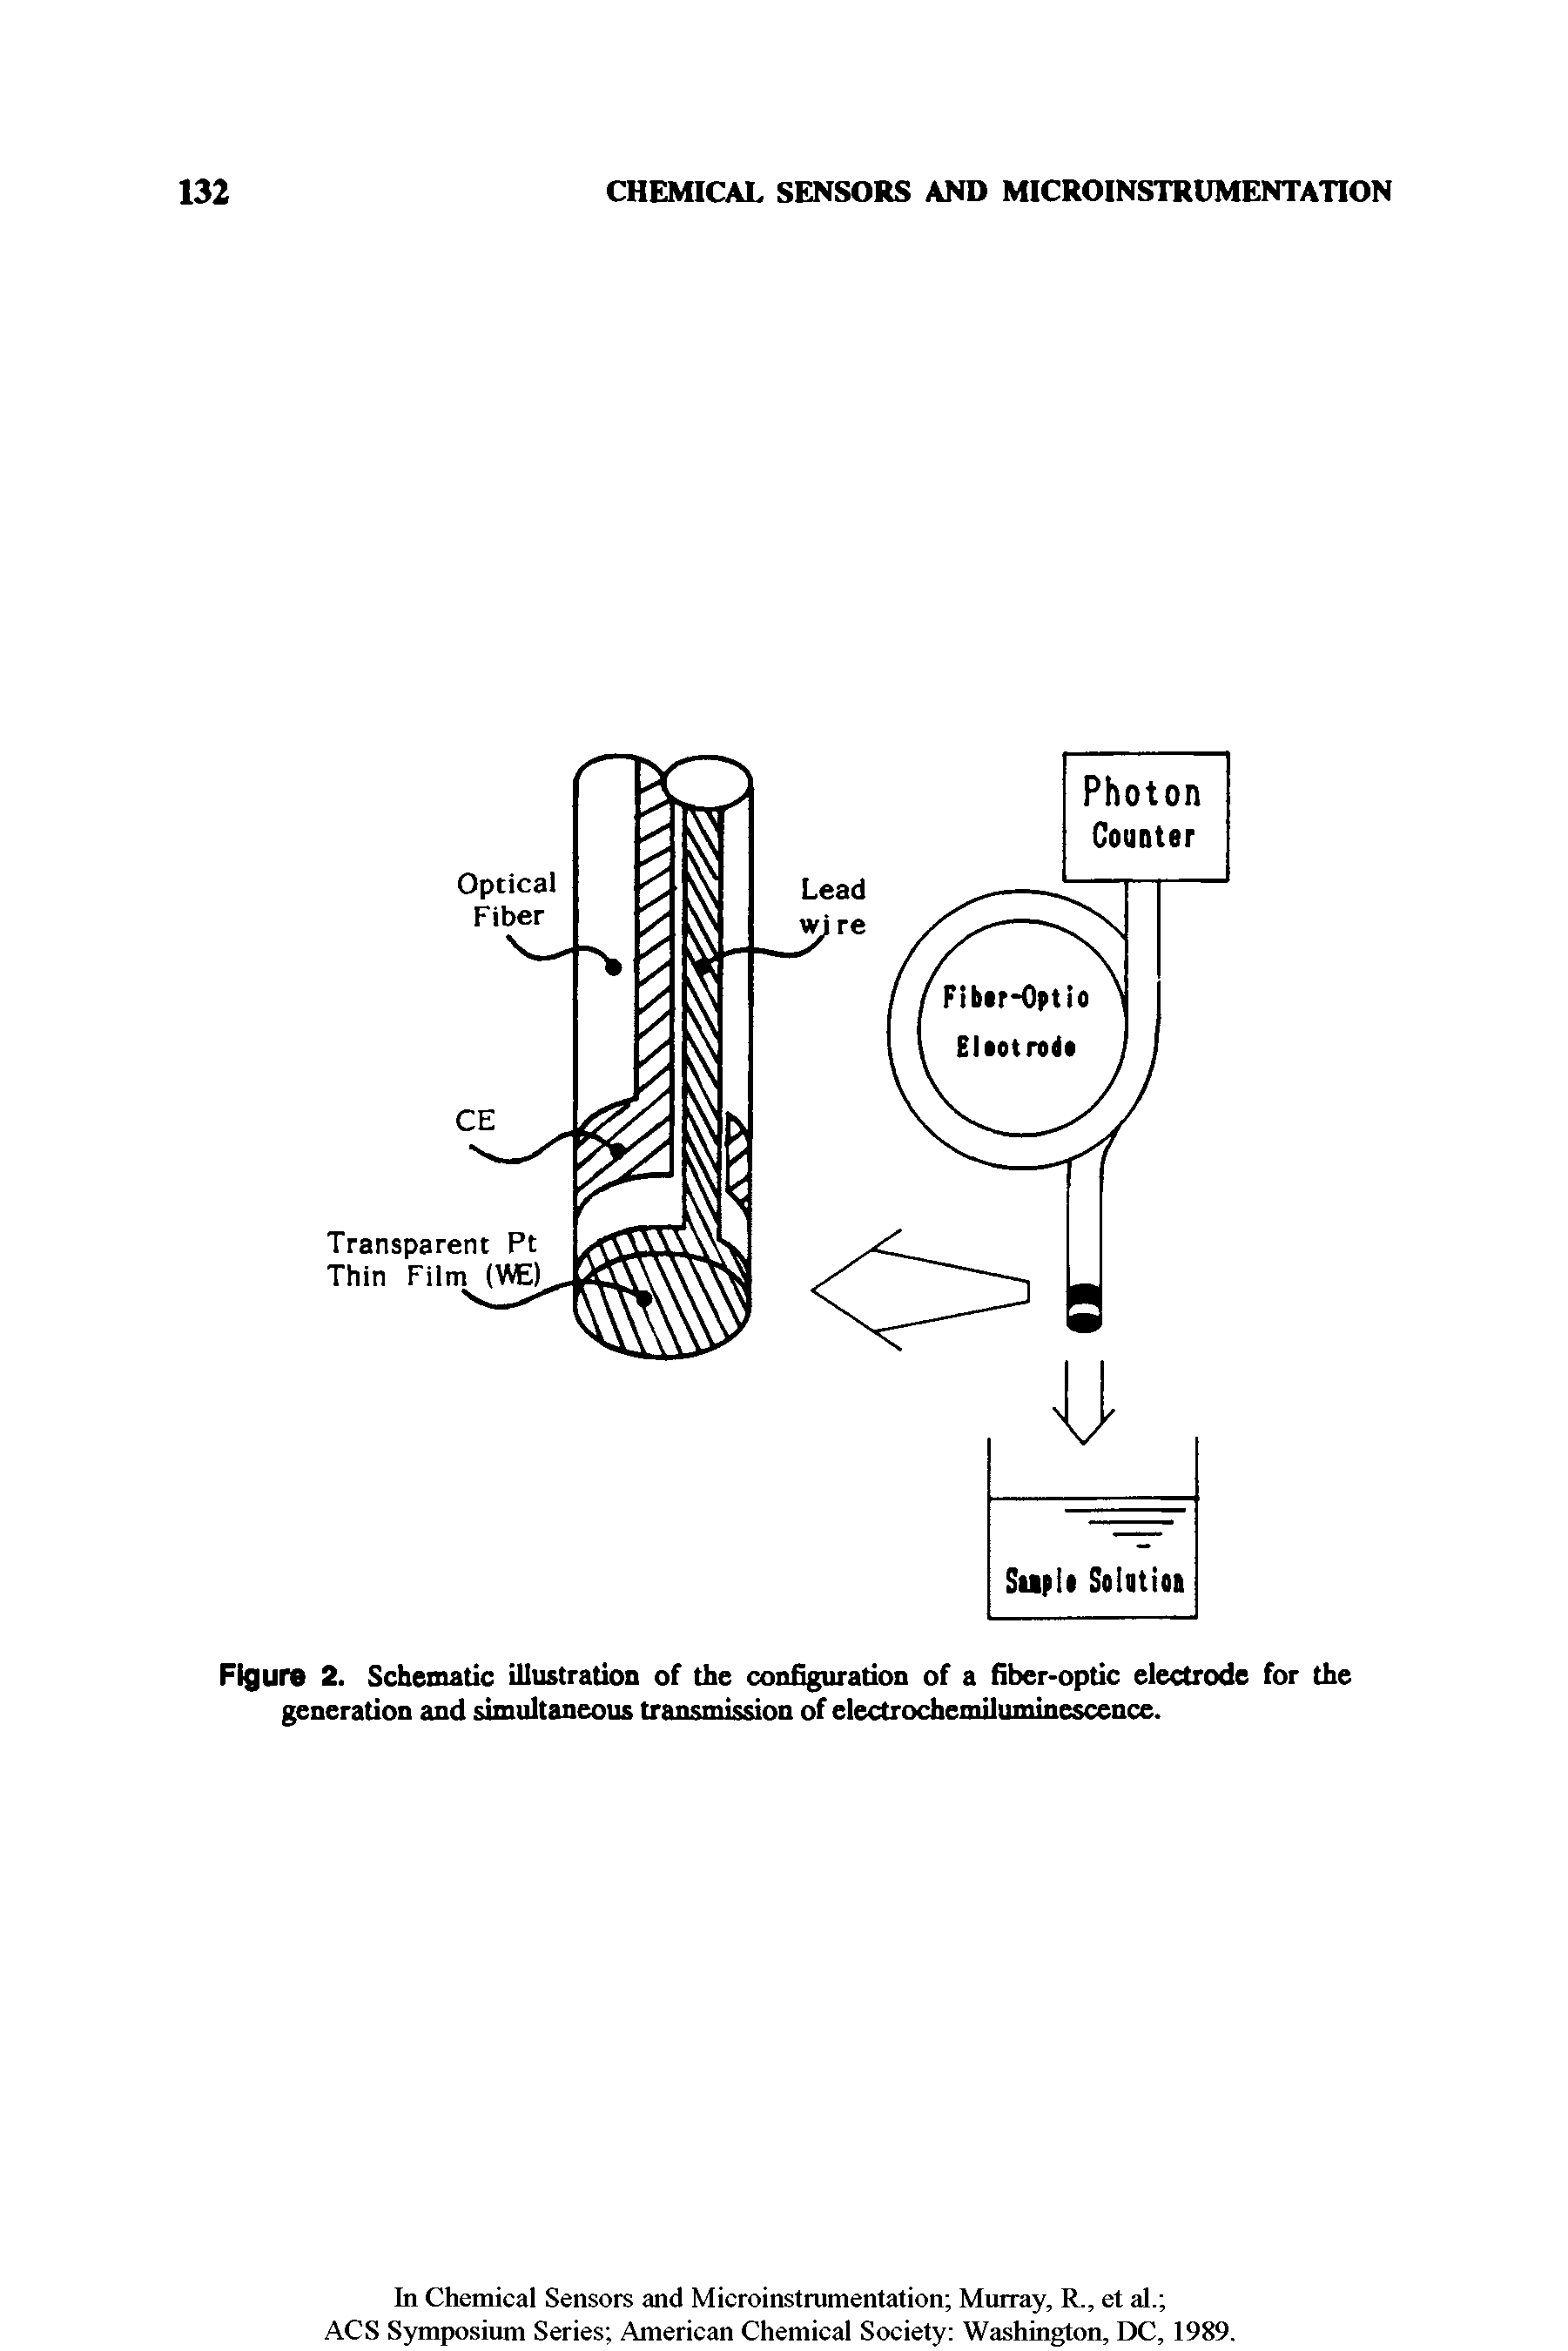 Figure 2. Schematic illustration of the configuration of a fiber-optic electrode for the generation and simultaneous transmission of electrochemiluminescence.